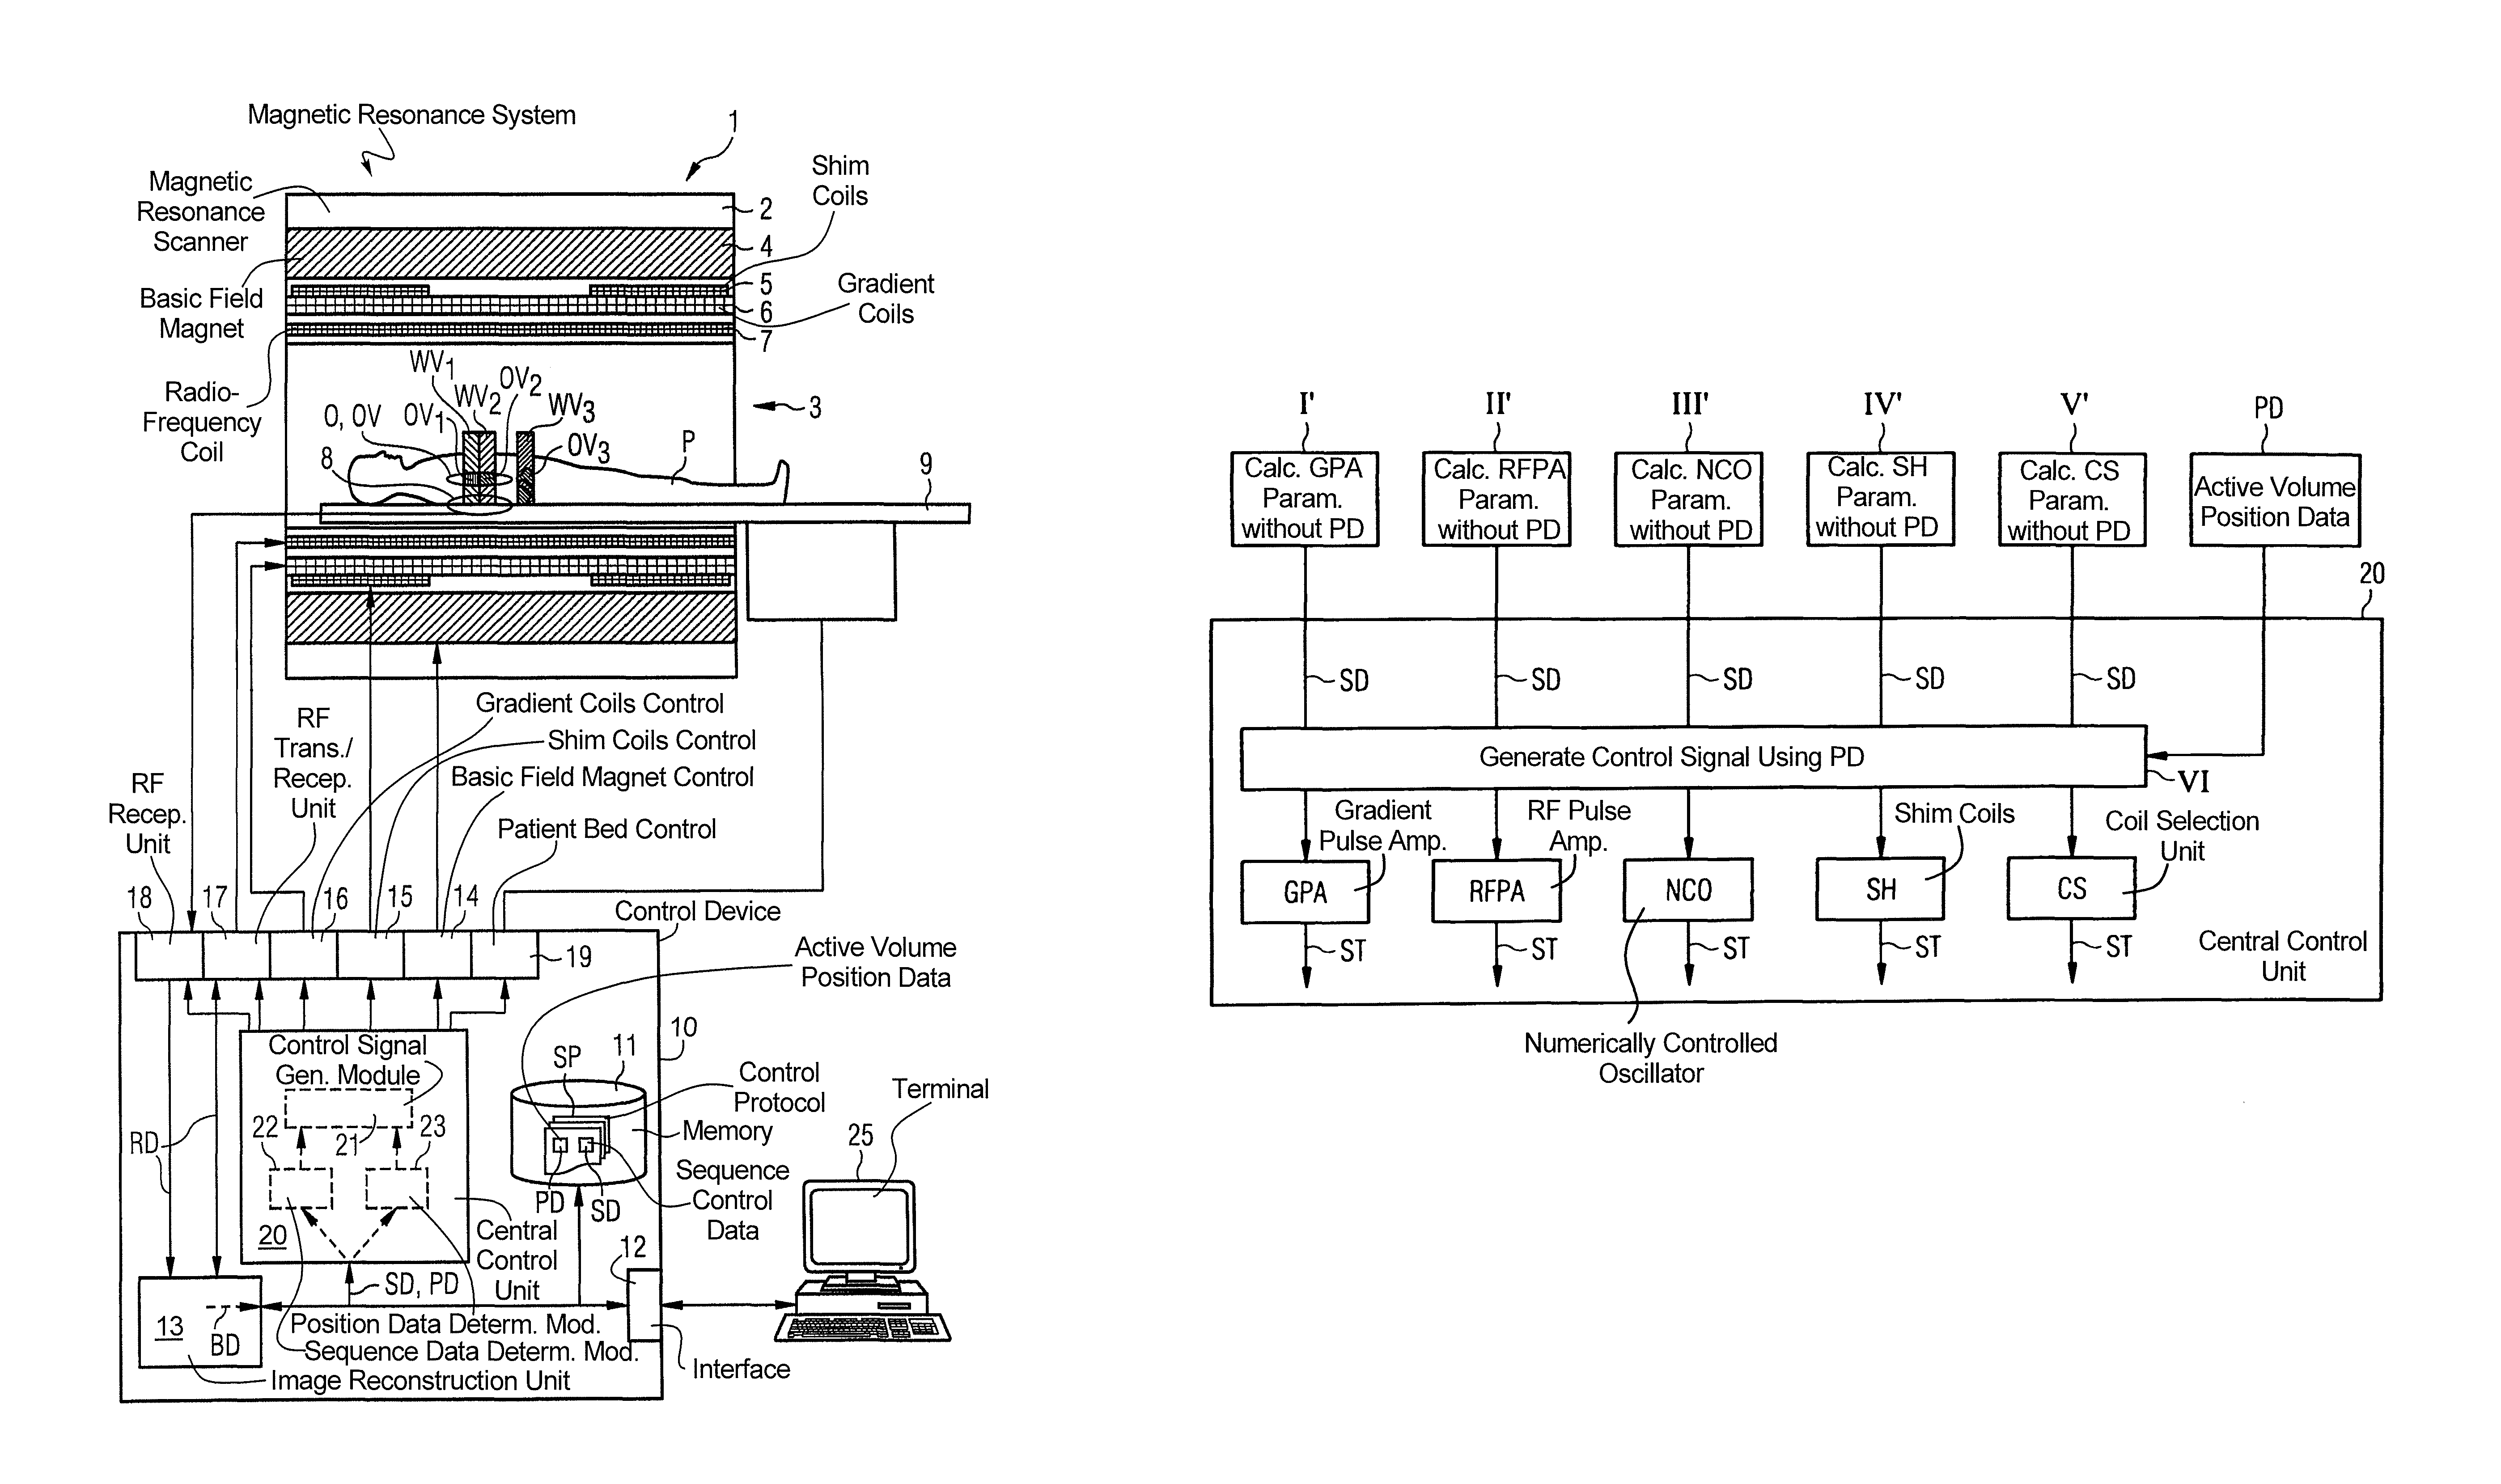 Method of operating an MRI imaging system, while also controlling graadient and shim sub-systems along with the MRI imaging system